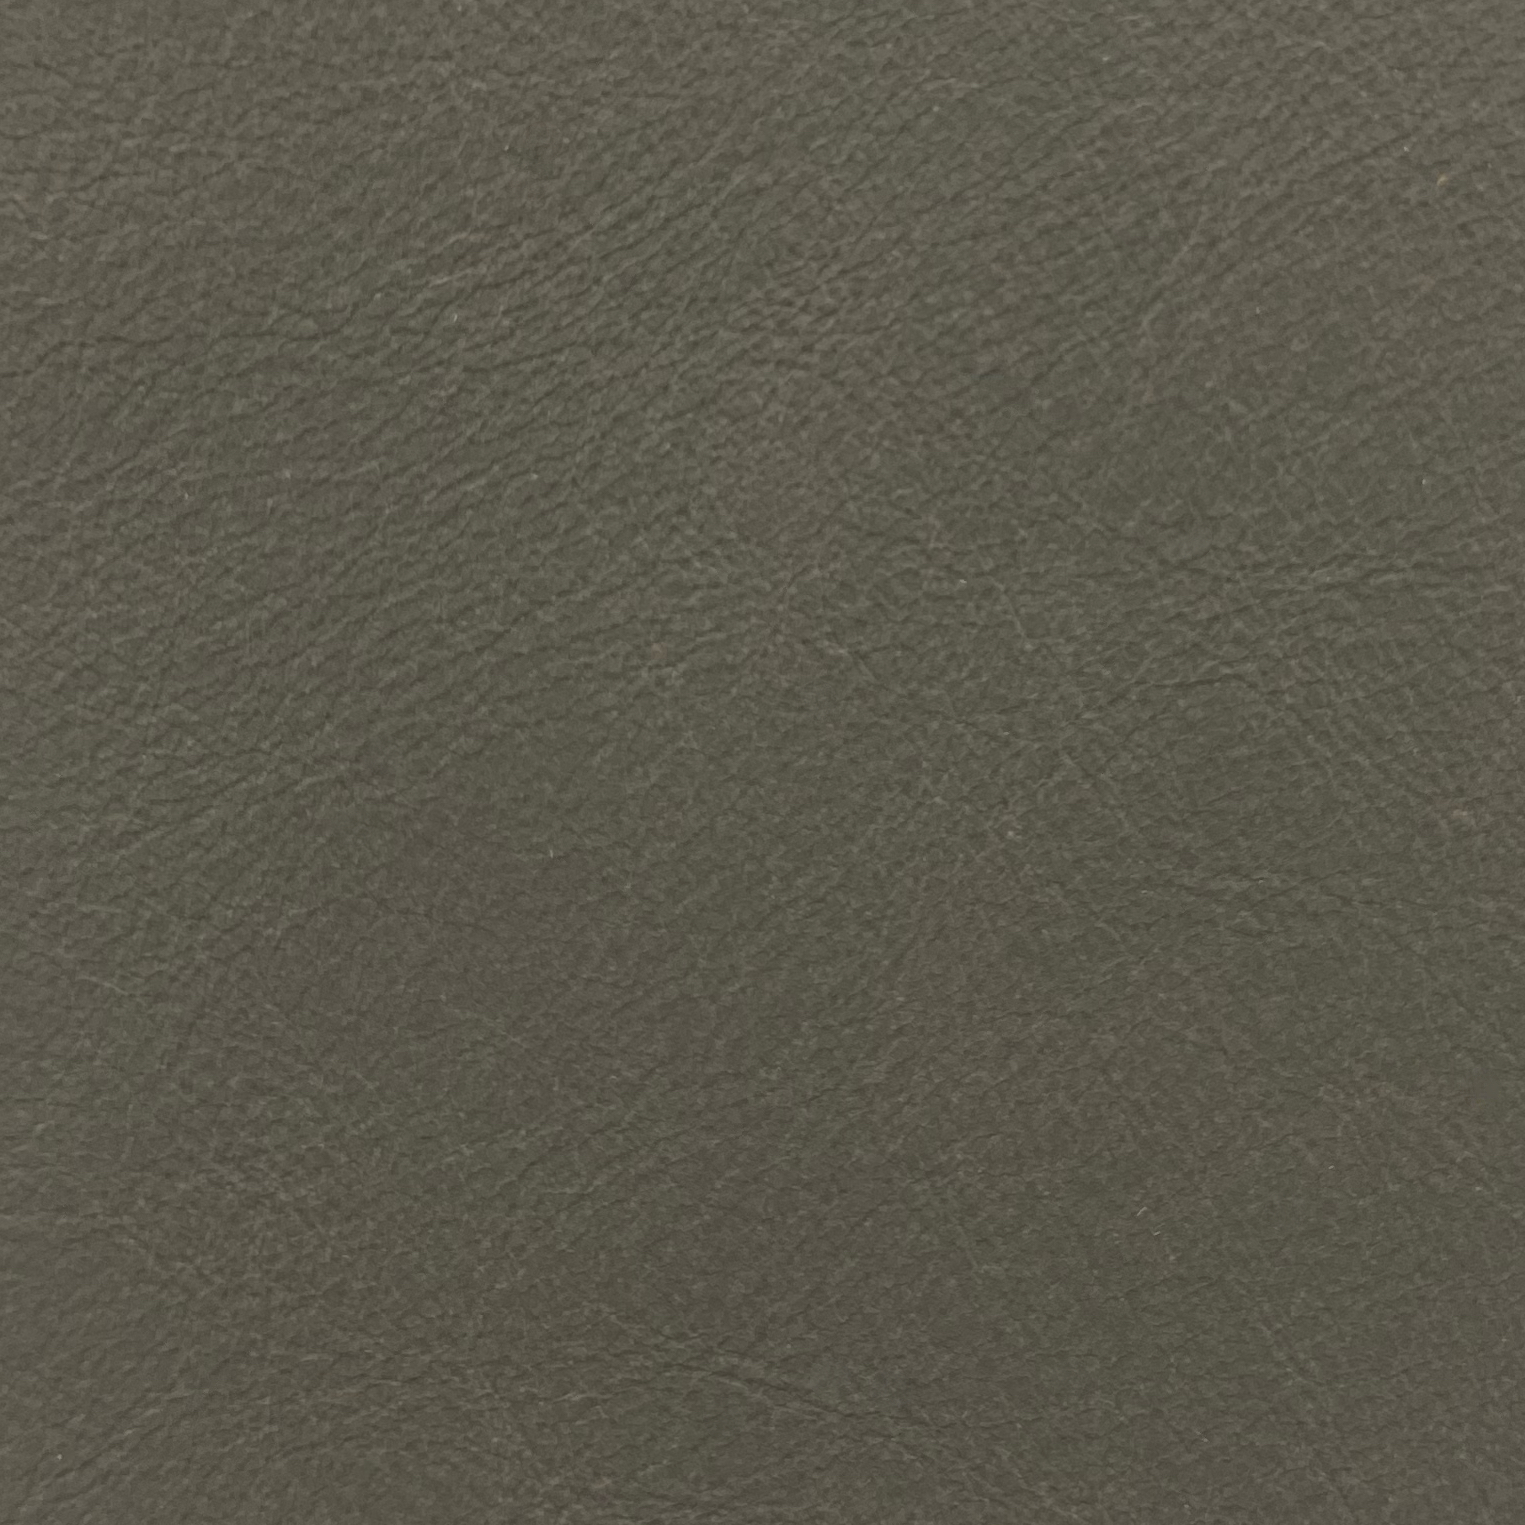 Leather Product: NT 4910